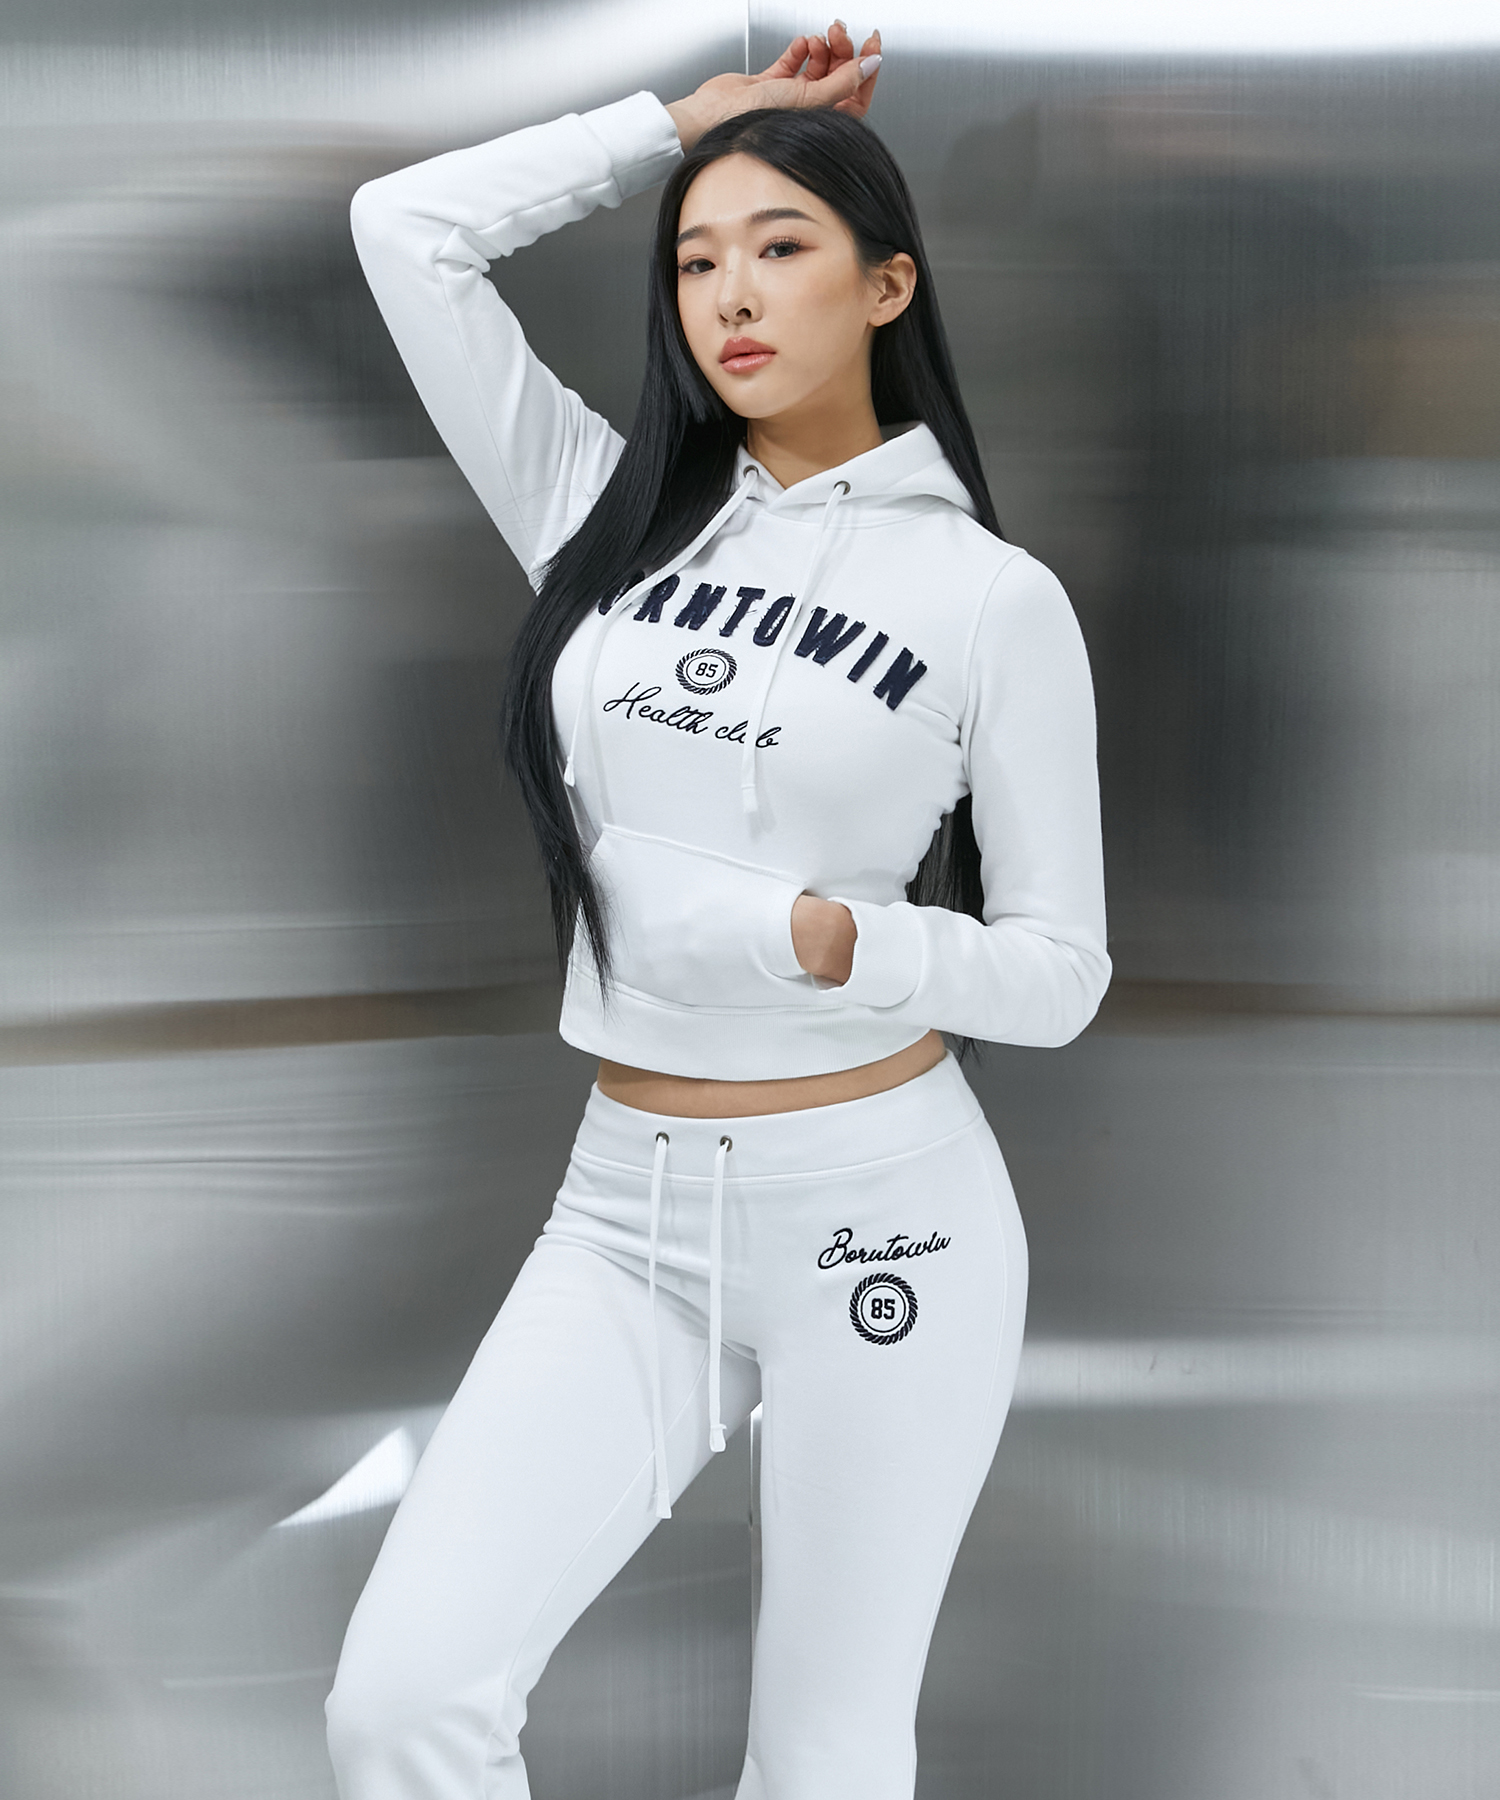 BORNTOWIN PATCH SLIM FIT HOODIE [WHITE]